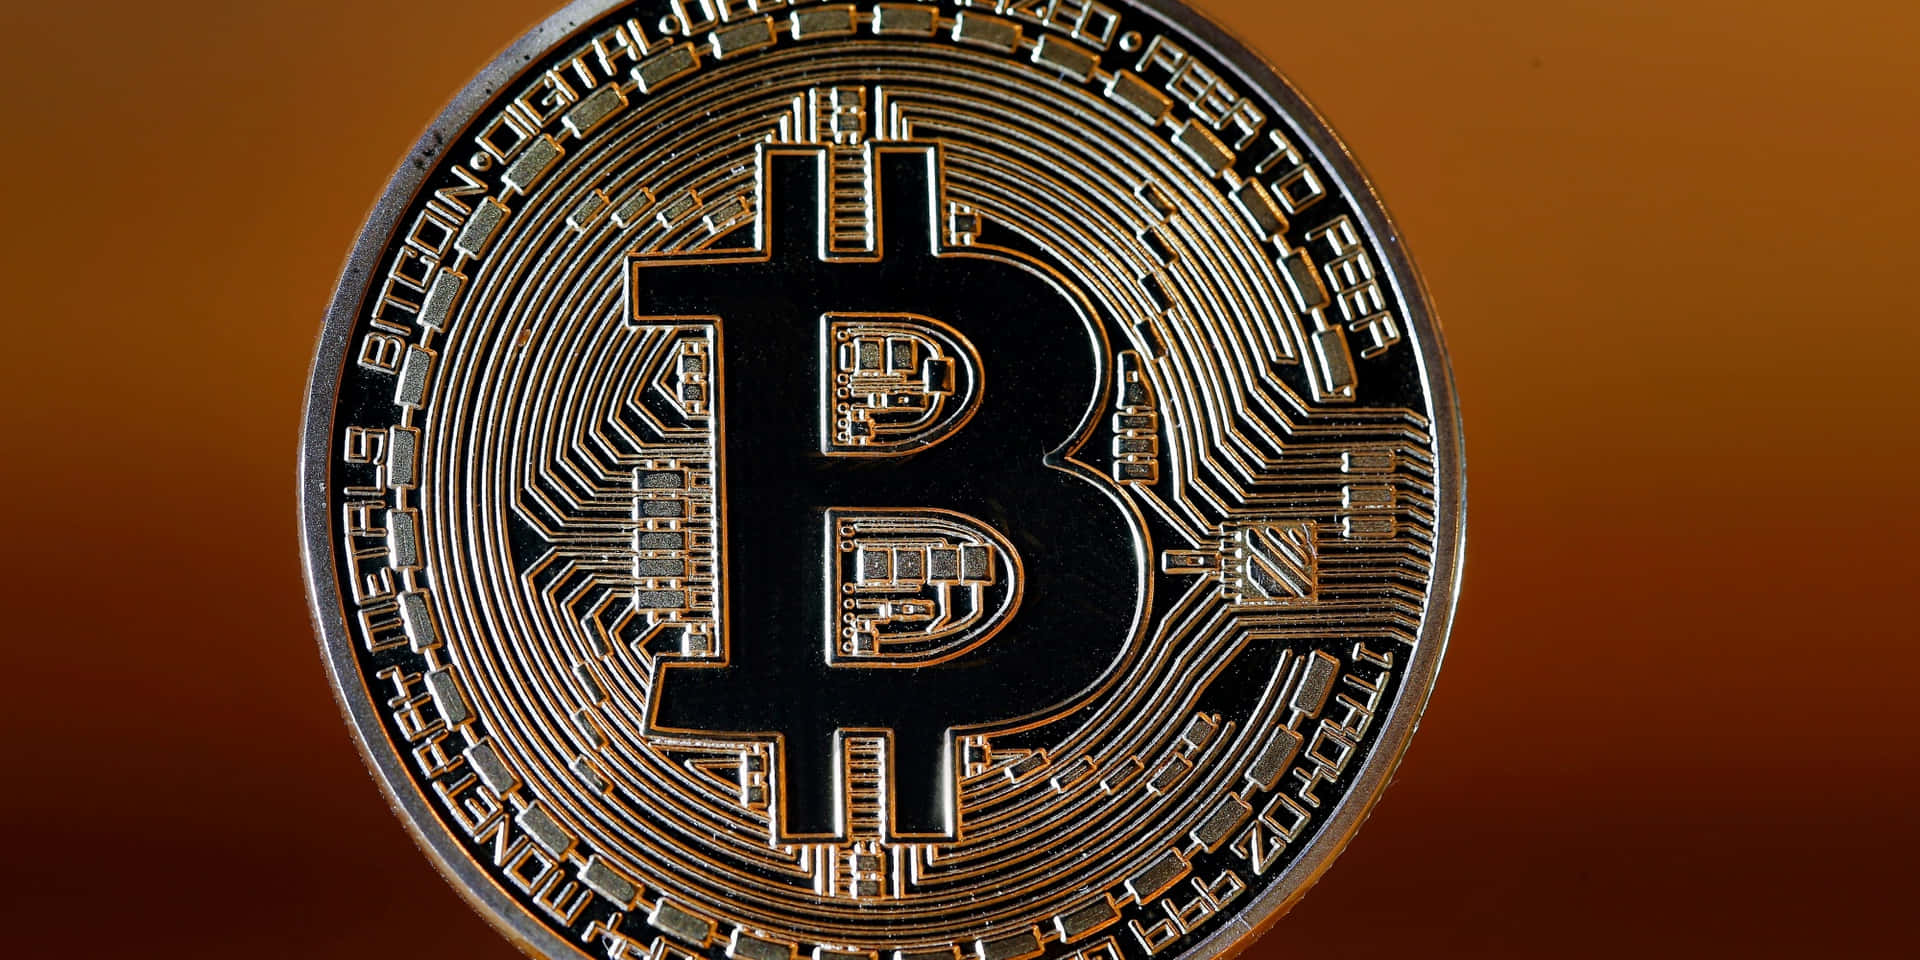 Bitcoin Is A Digital Currency That Is Used To Pay For Goods And Services